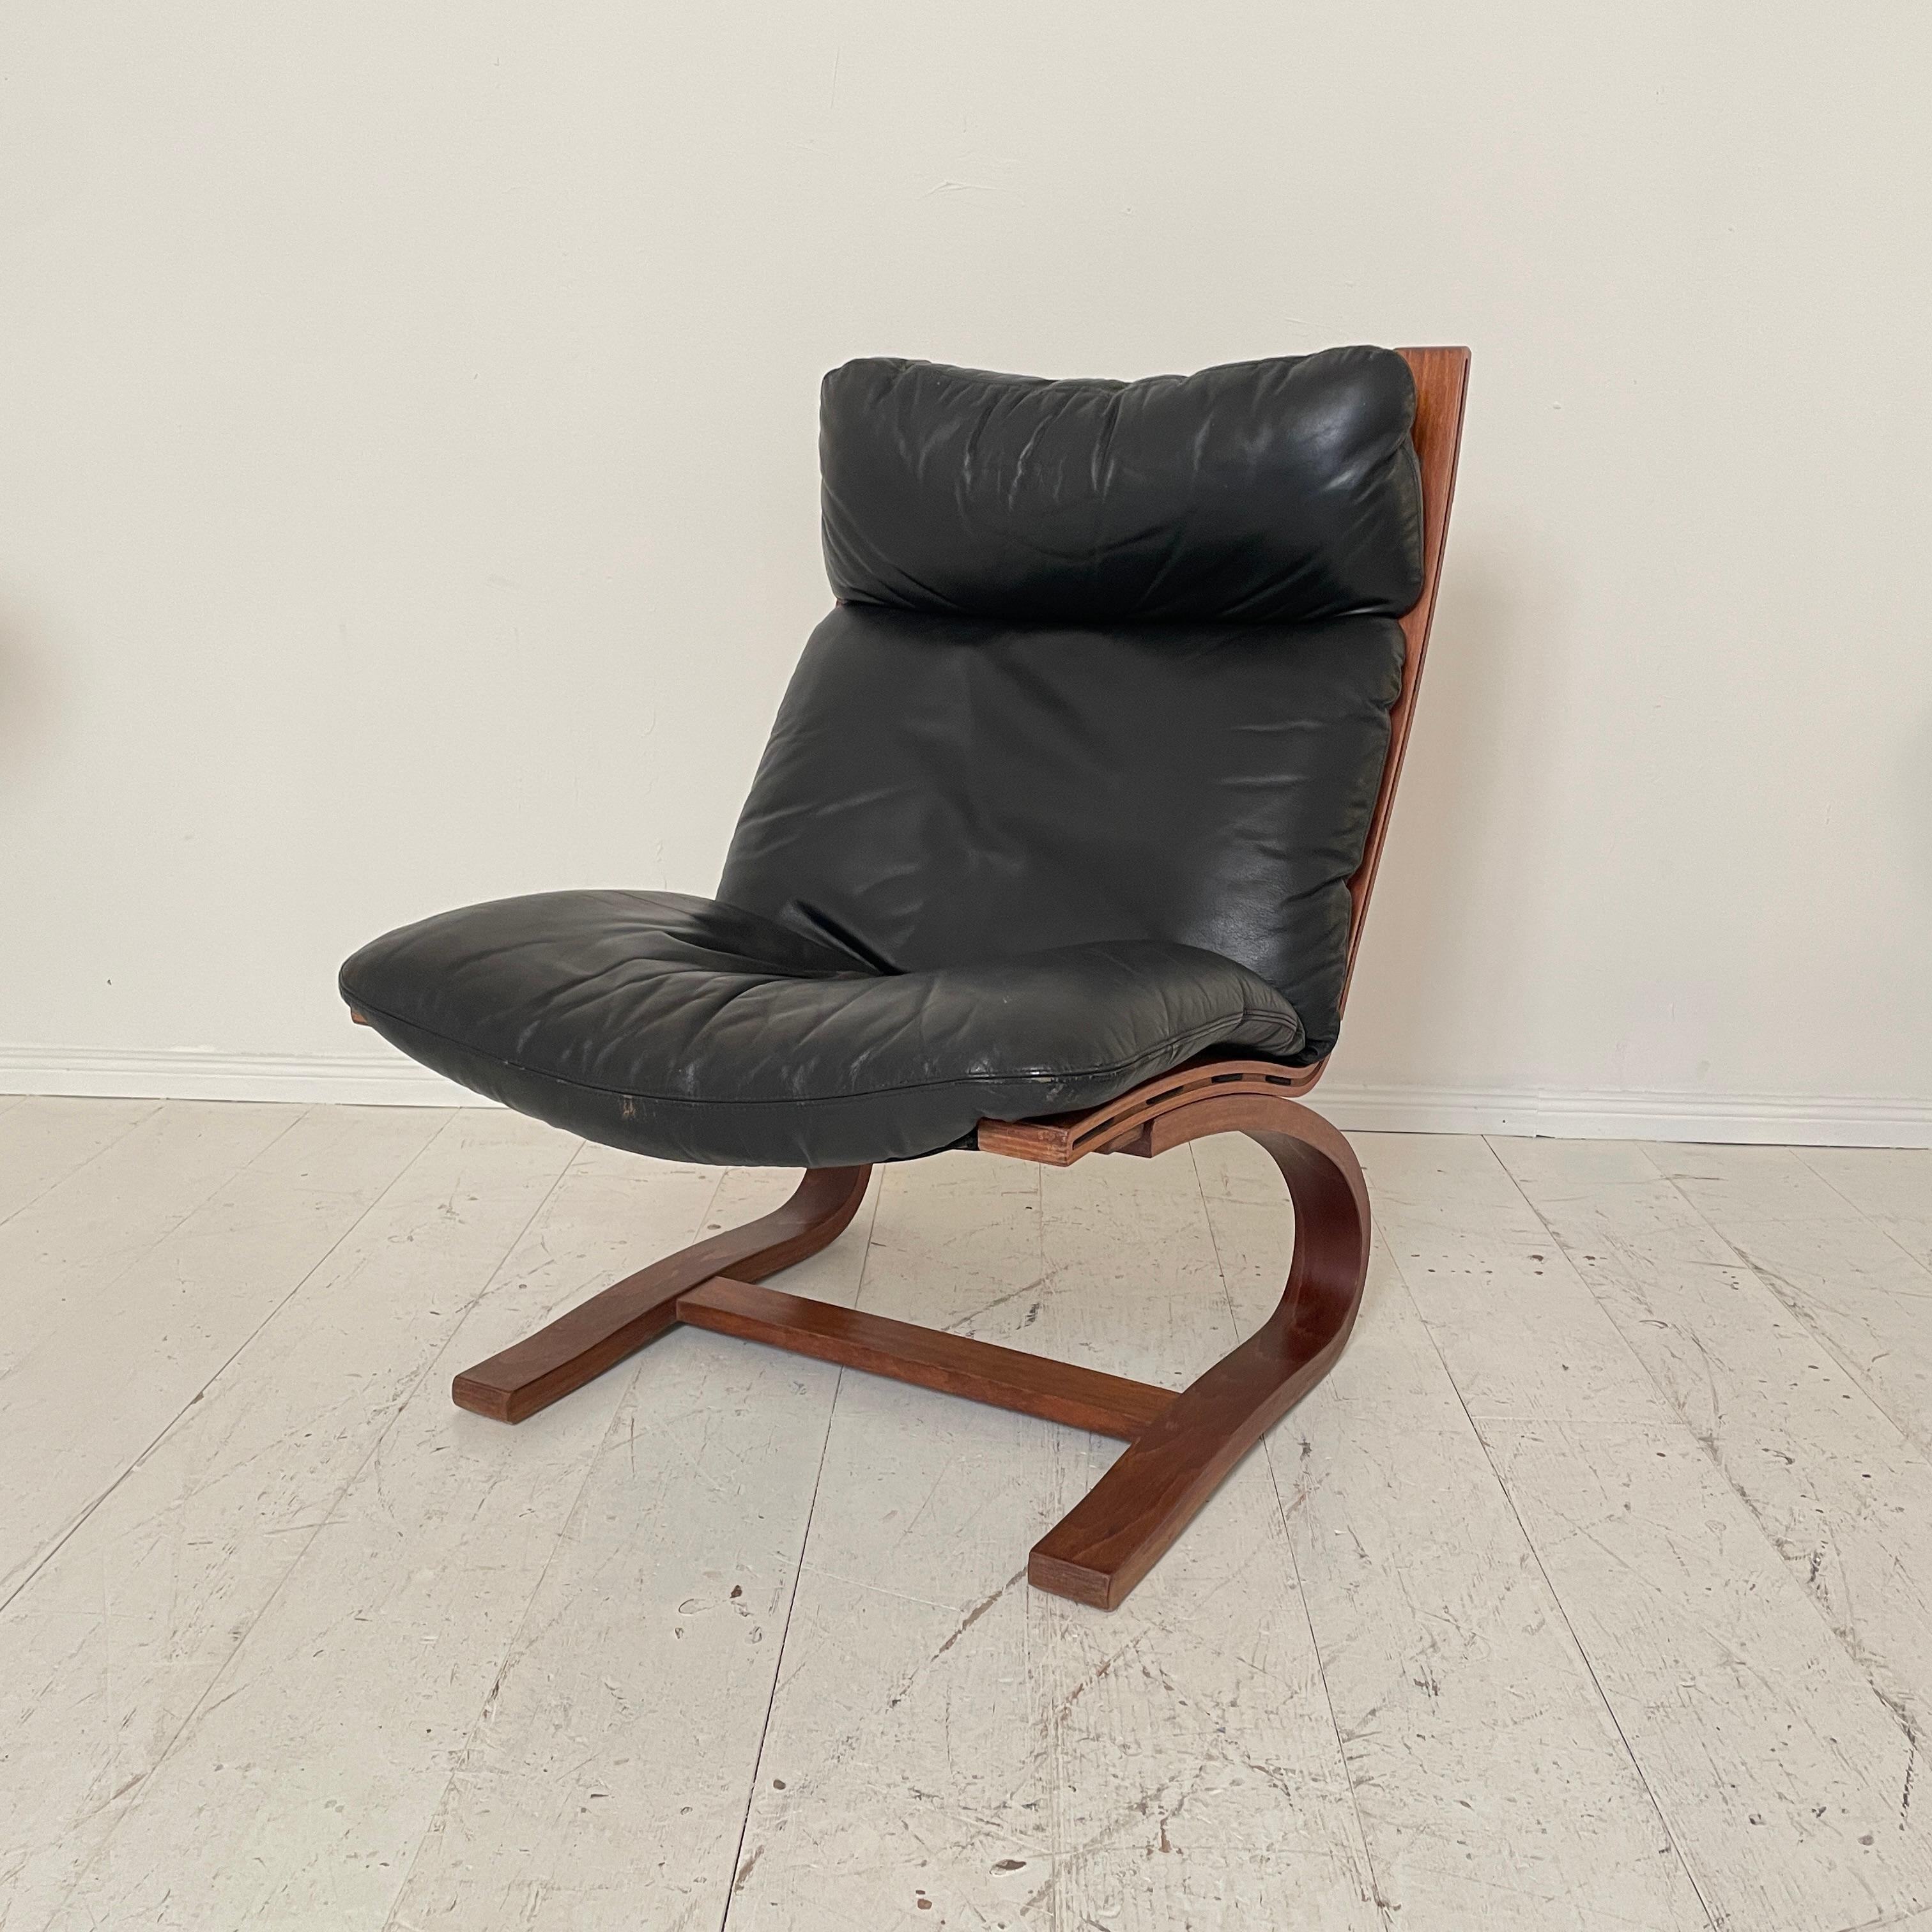 This mid-century lounge chair “Siesta”, was designed by Ingmar Relling for Westnofa Black in the 1970s.
It is made out of beech wood and black leather.
A unique piece which is a great eye-catcher for your antique, modern, space age or mid-century